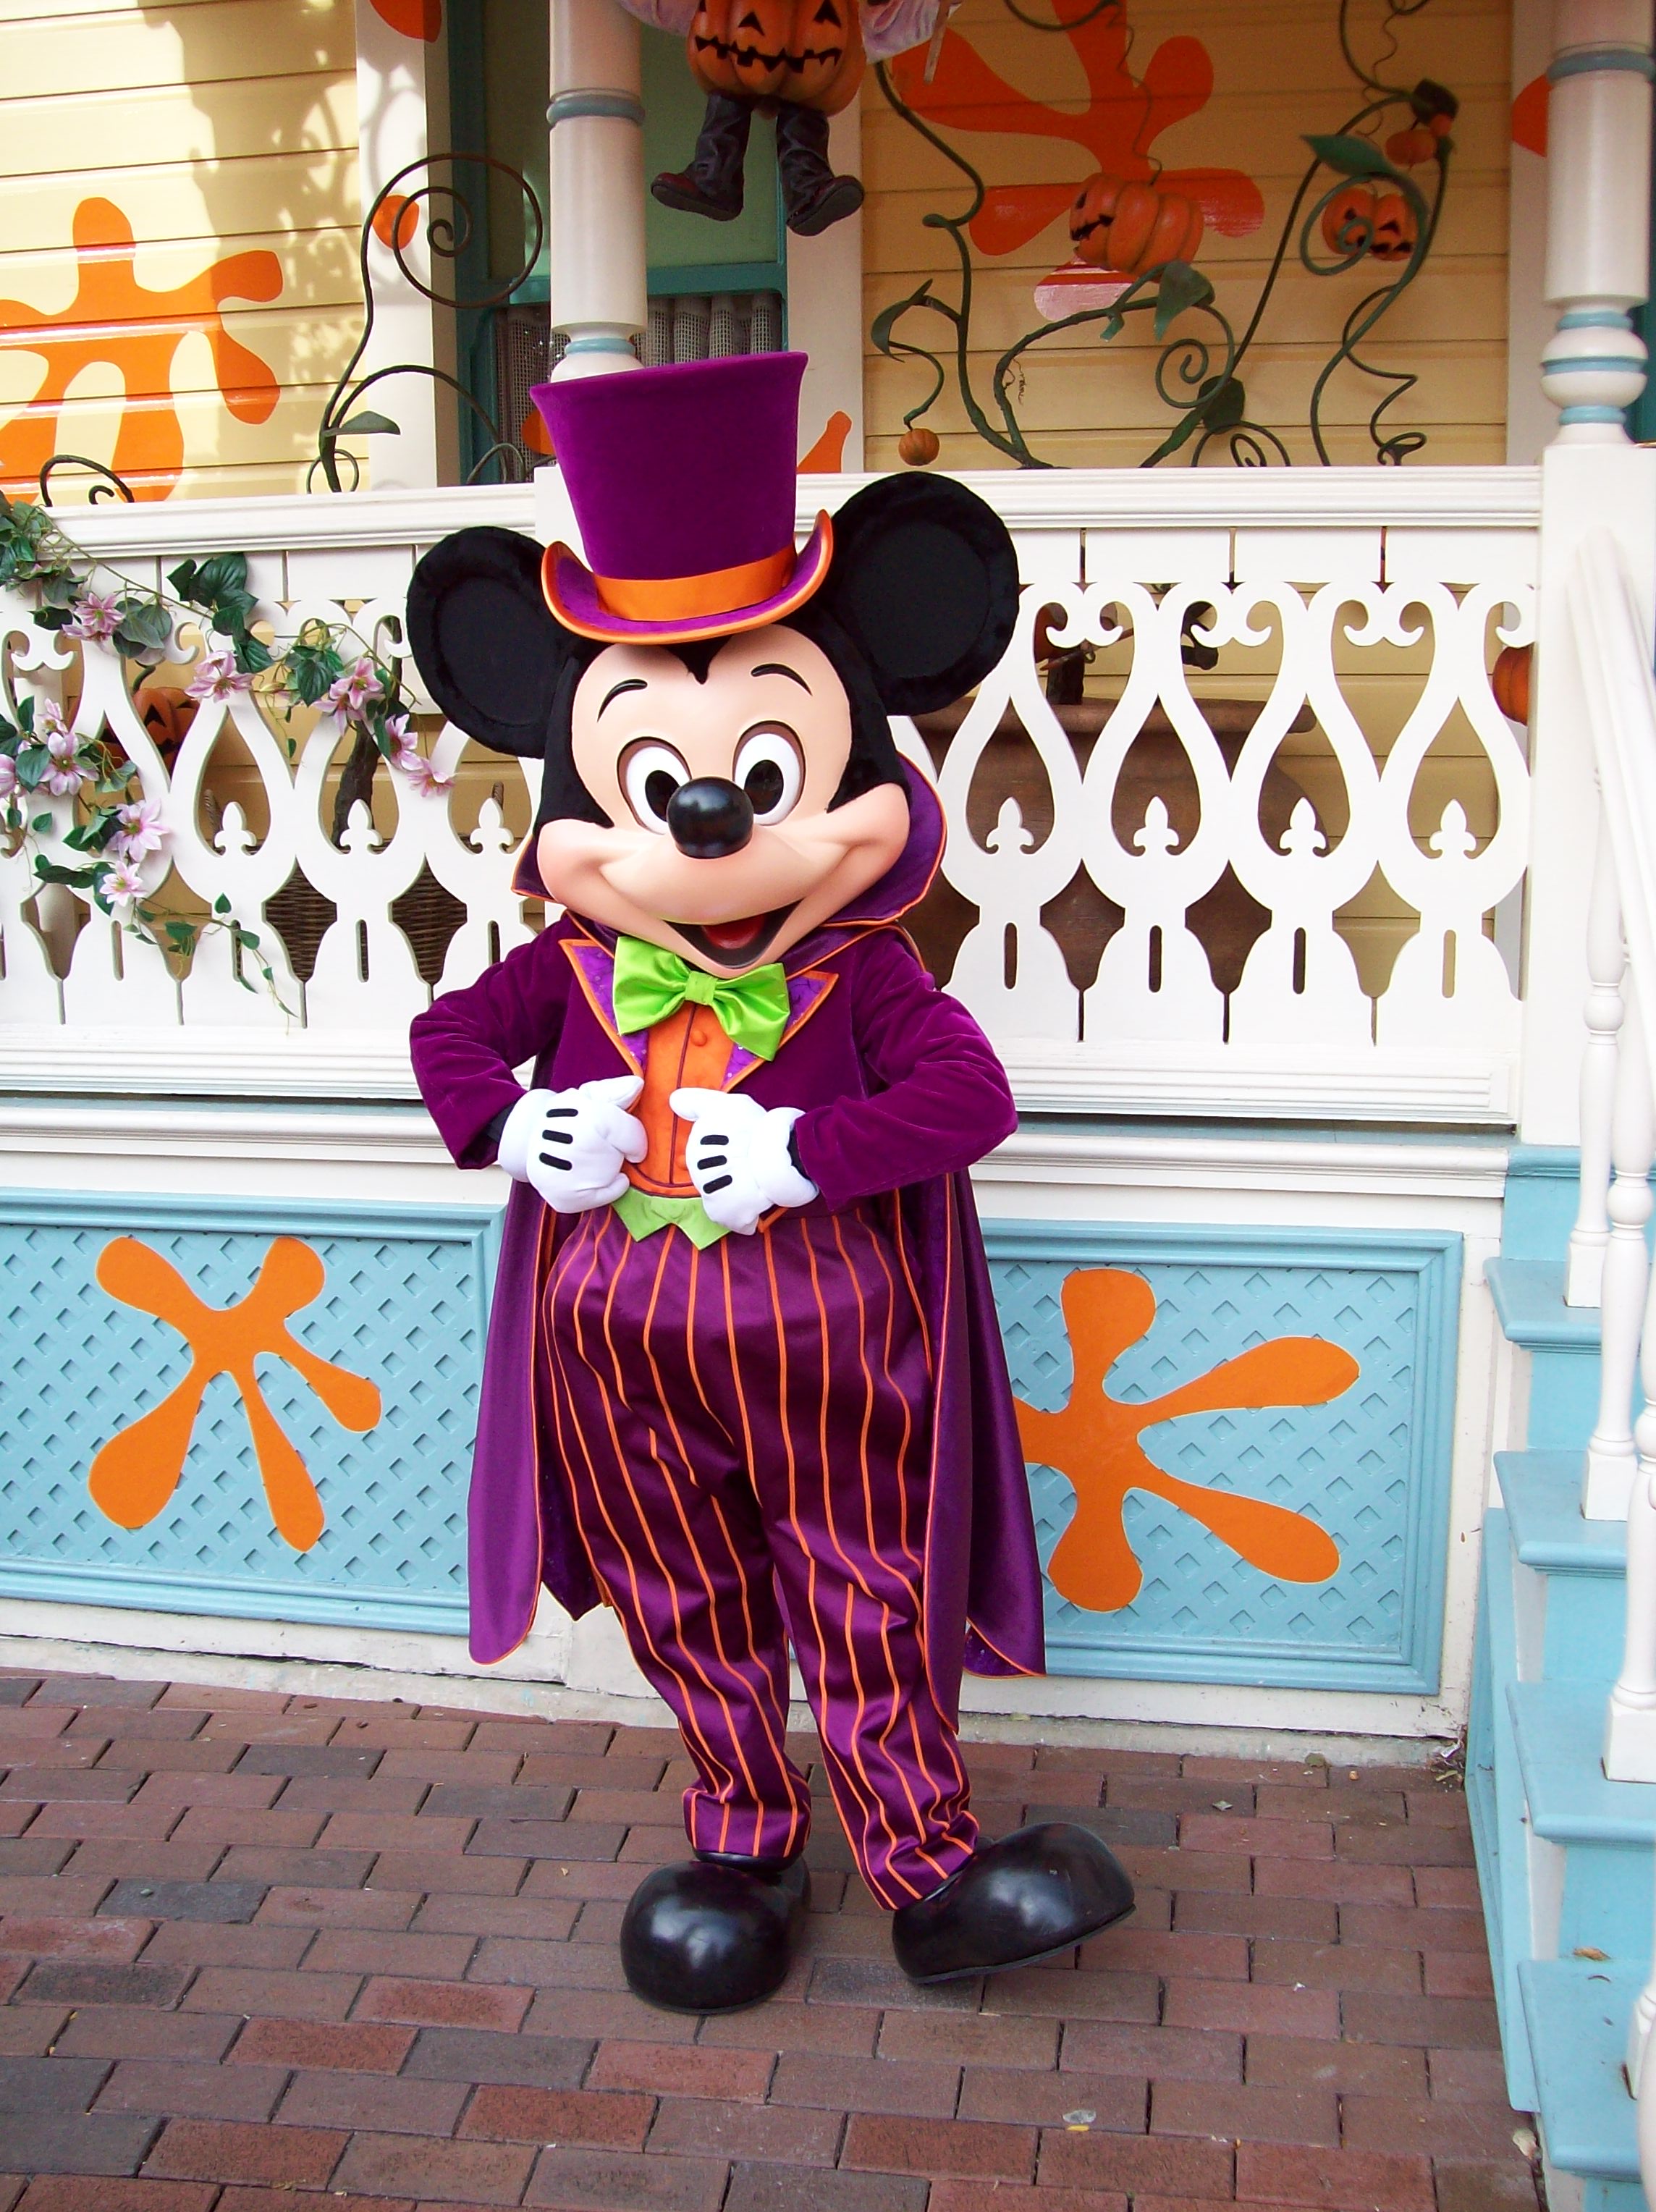 In 2008 Mickey was showing his Halloween side by wearing this purple Halloween outfit. Mickey couldn't decide if he wanted to wear his top hat with it or not, in this photo he decided to wear it.